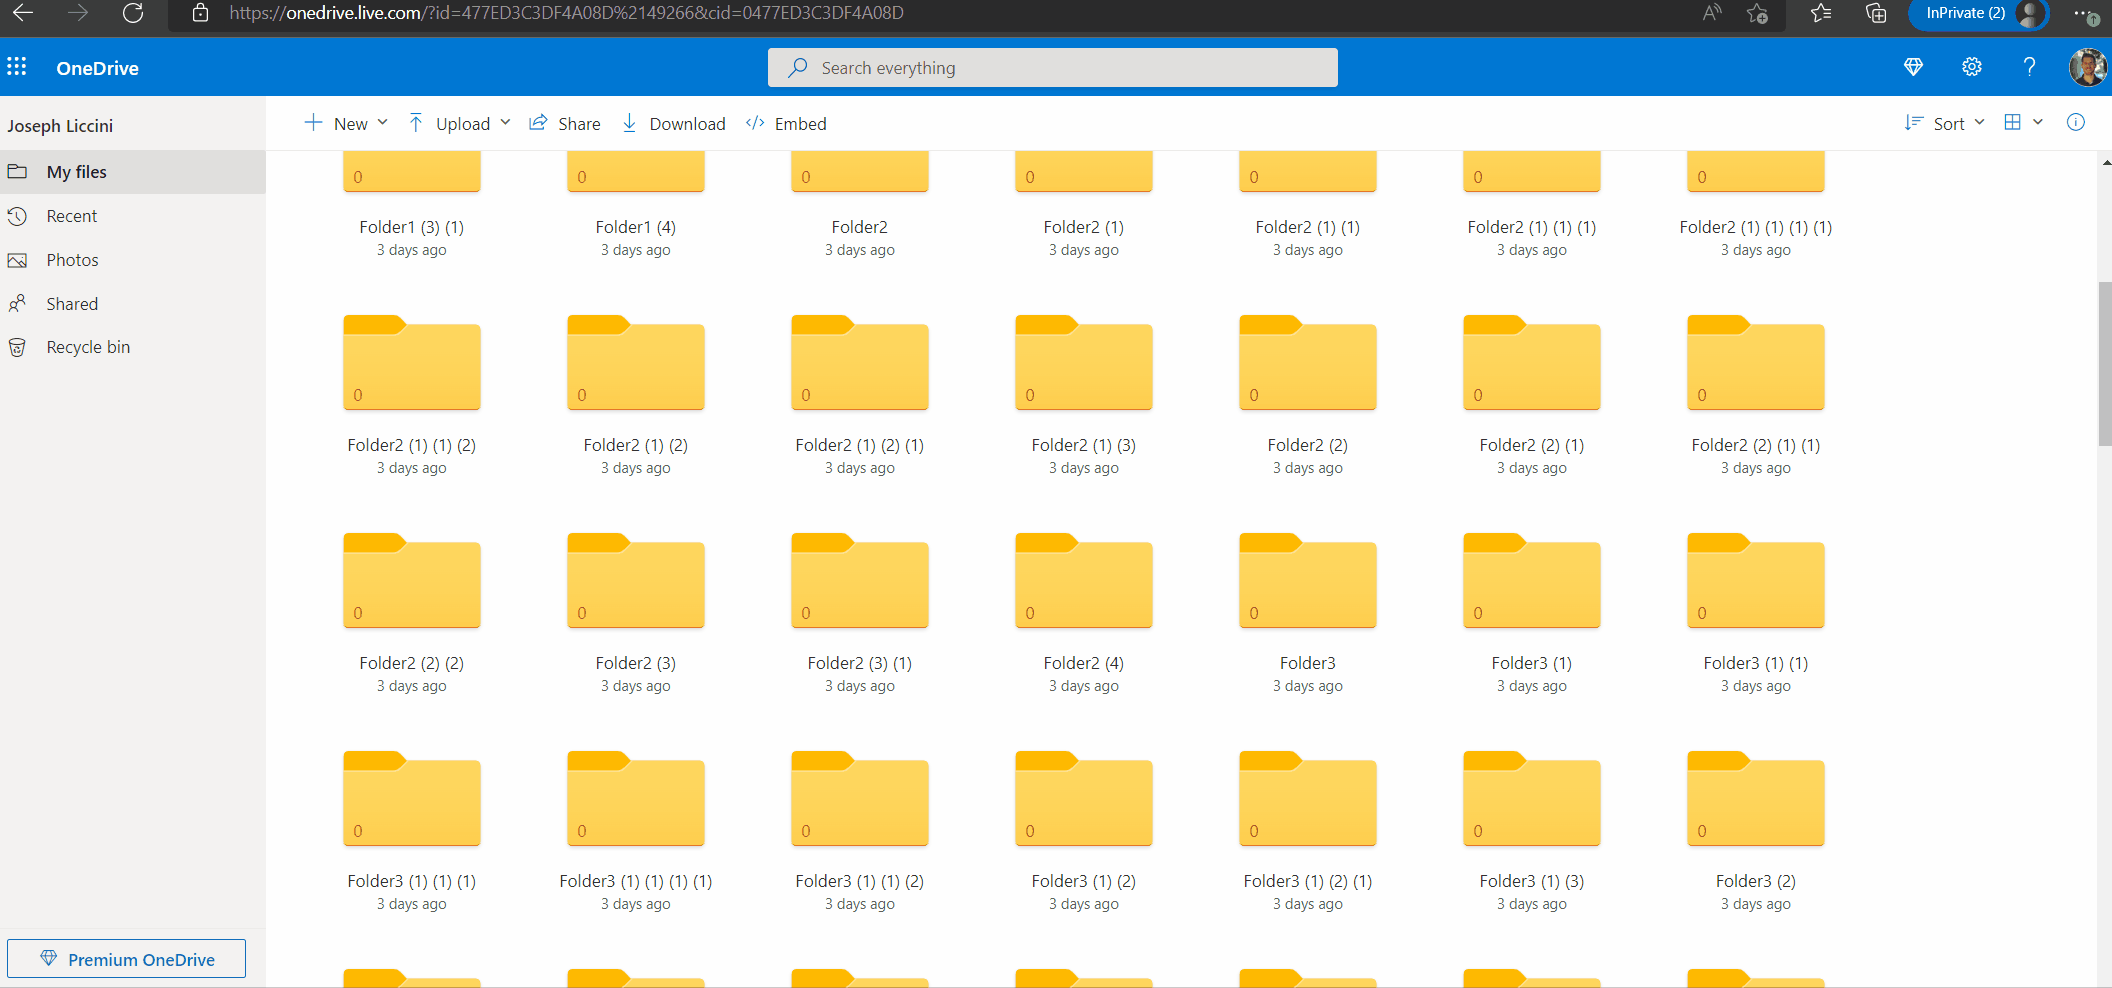 A recording of me scrolling through the OneDrive Files grid, and it appearing choppy